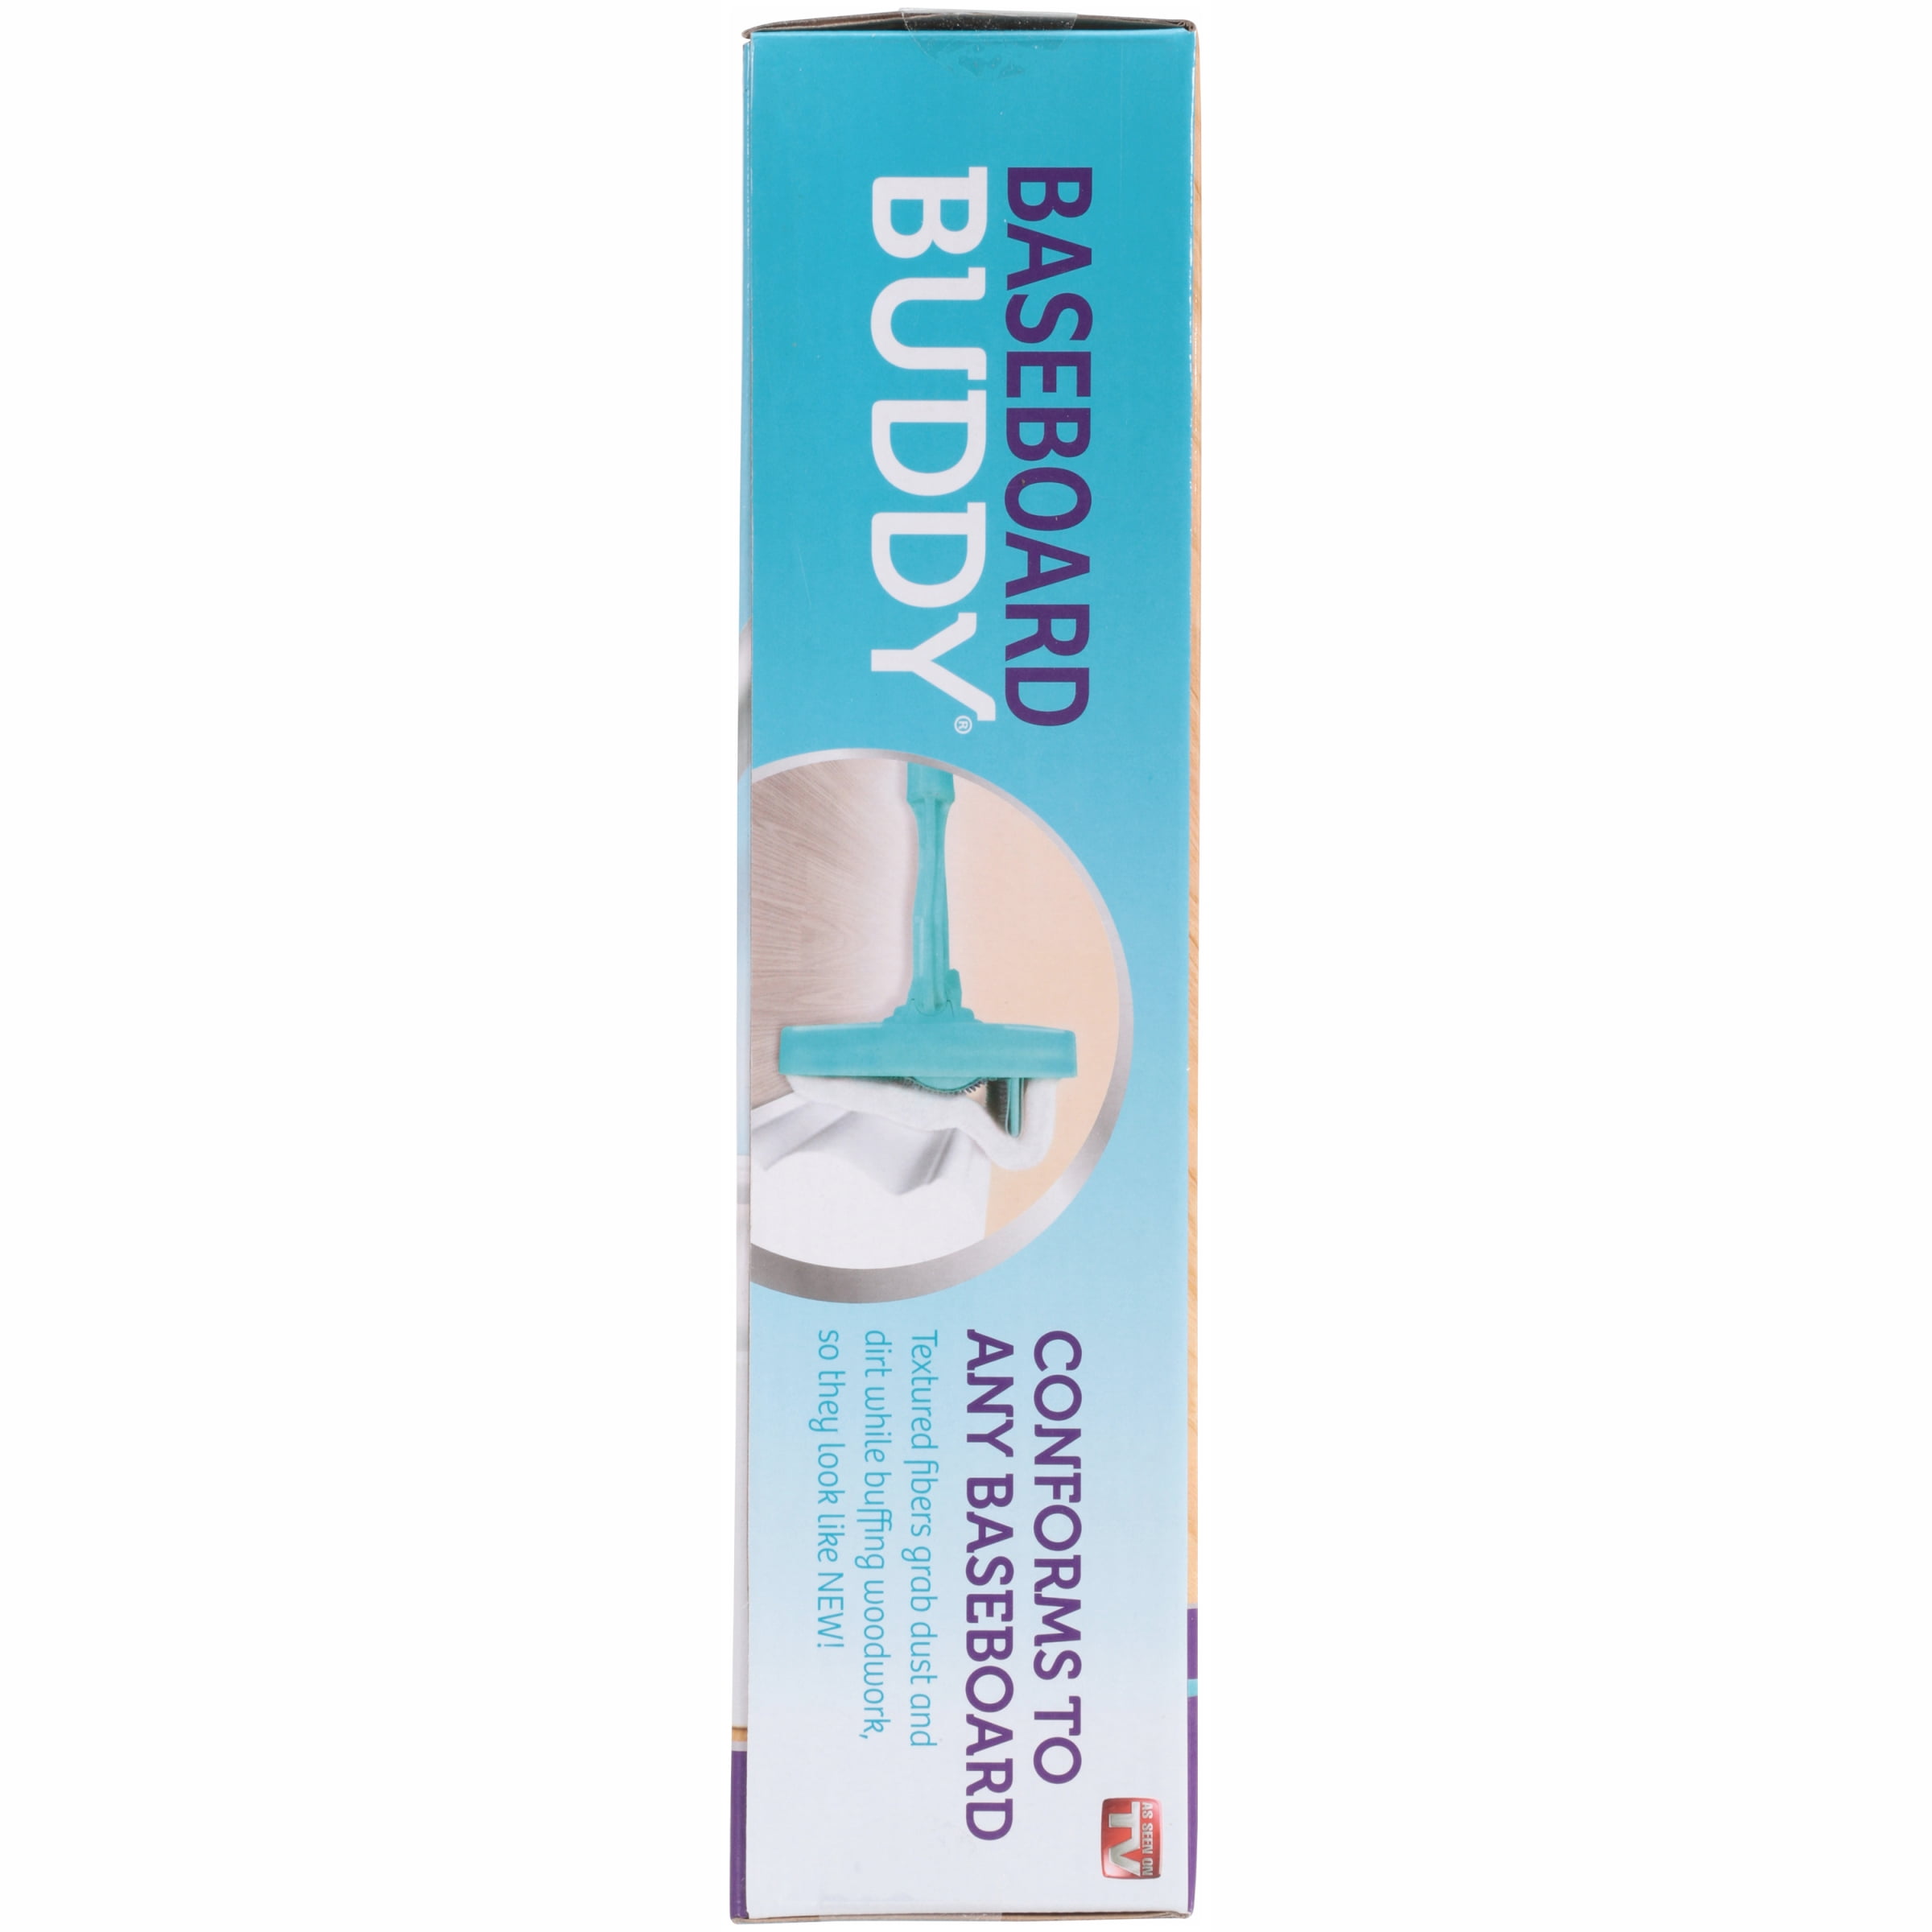 Baseboard Buddy Review & #Giveaway - The Frugal Ginger